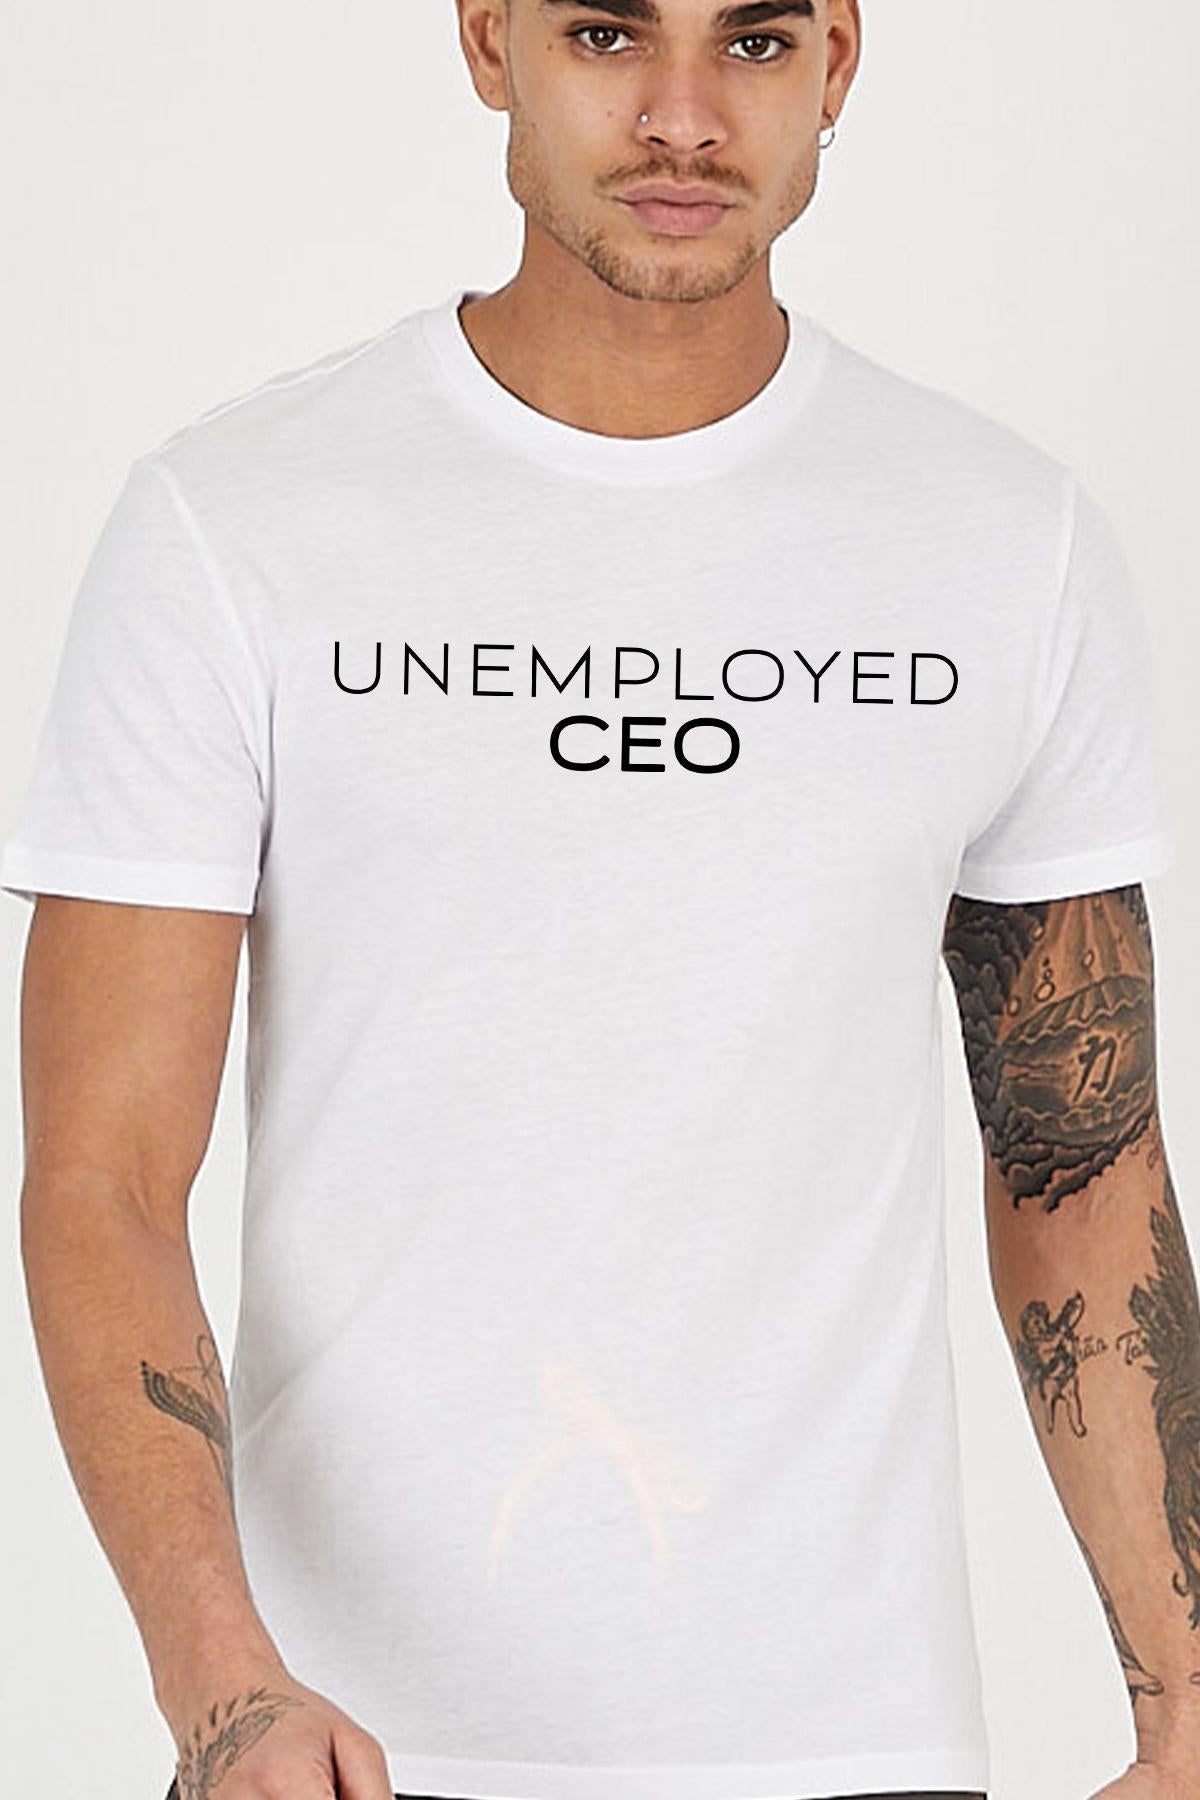 UNEMPLOYED_CEO printed Crew Neck men's t -shirt